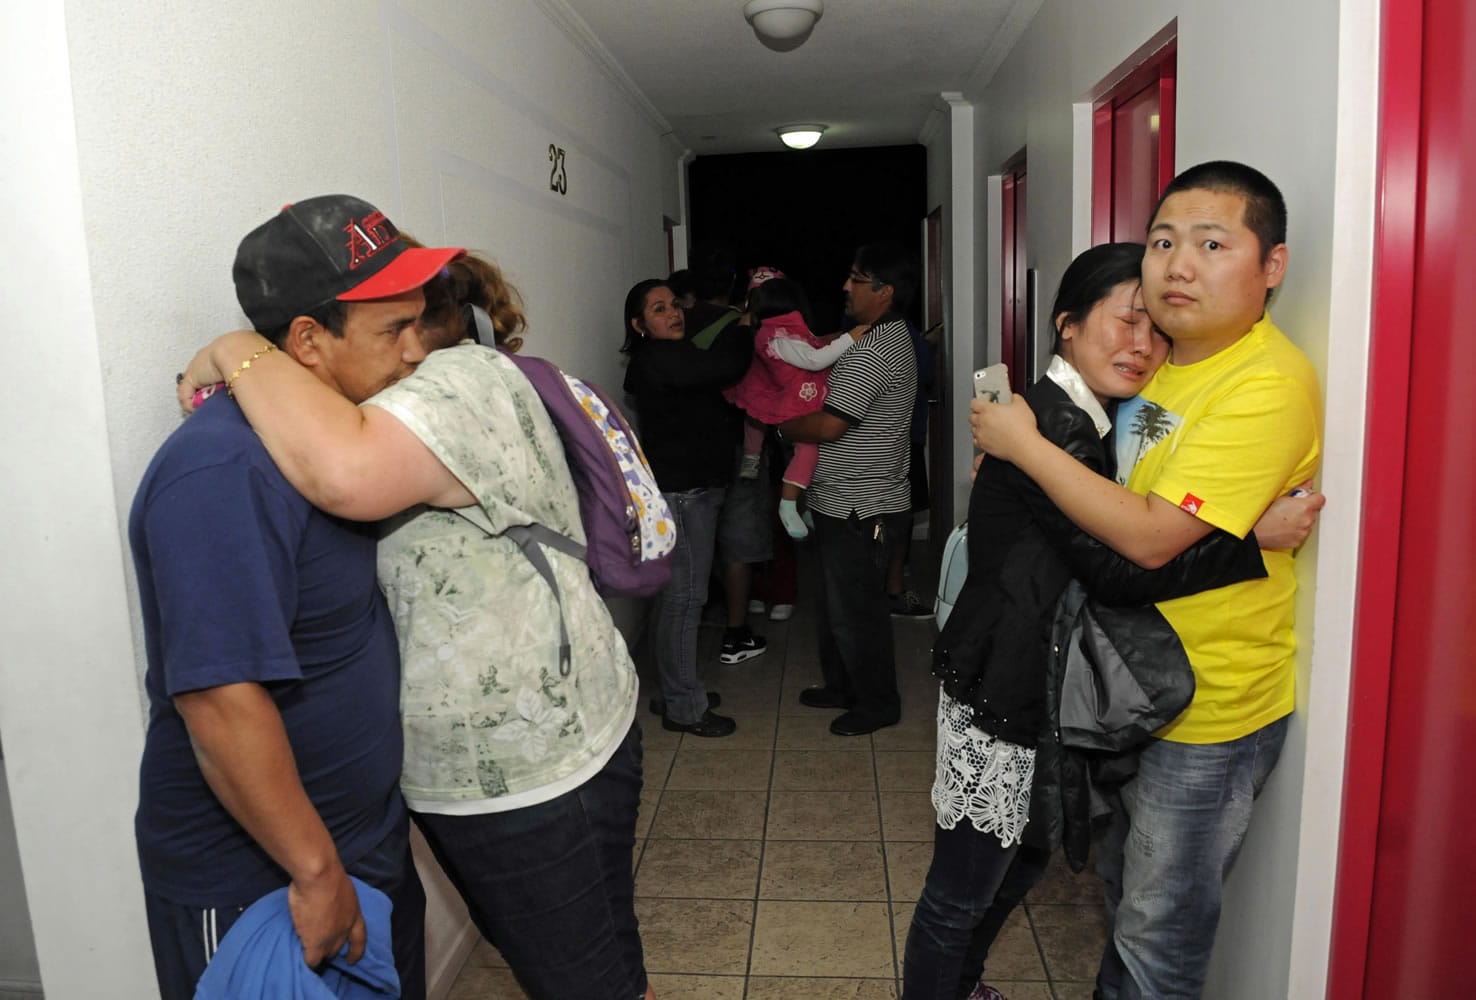 People embrace Tuesday on the upper floor of an apartment building a few blocks from the coast in Iquique, Chile, having gathered for safety in case of a tsunami after a magnitude-8.2 earthquake.